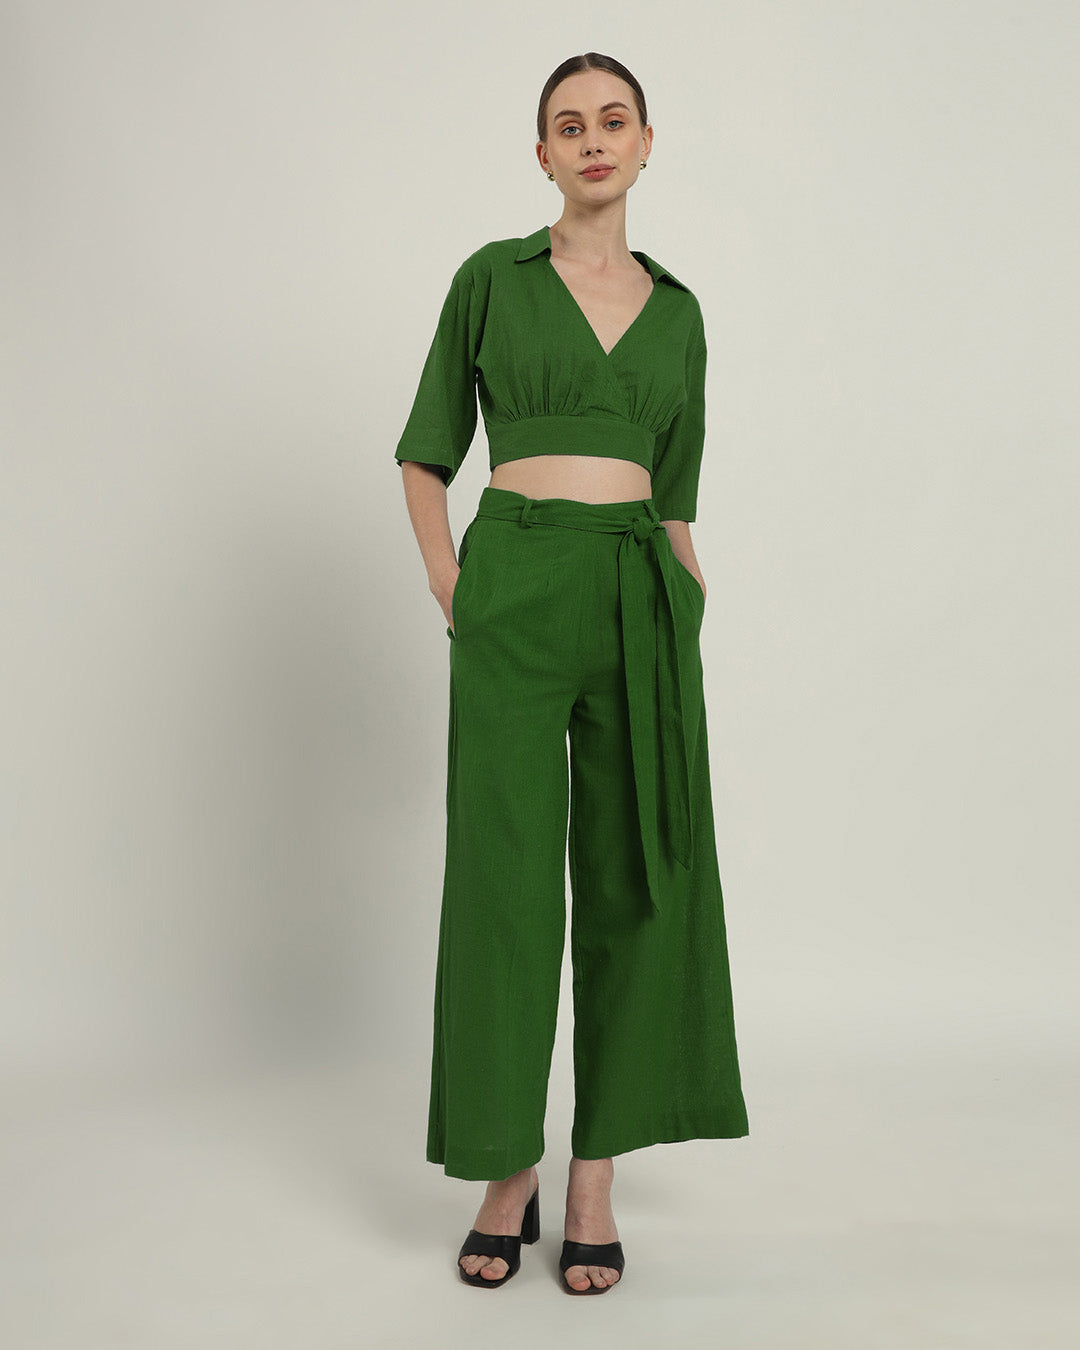 V Graceful Gathers Crop Solid Emerald Top (Without Bottoms)